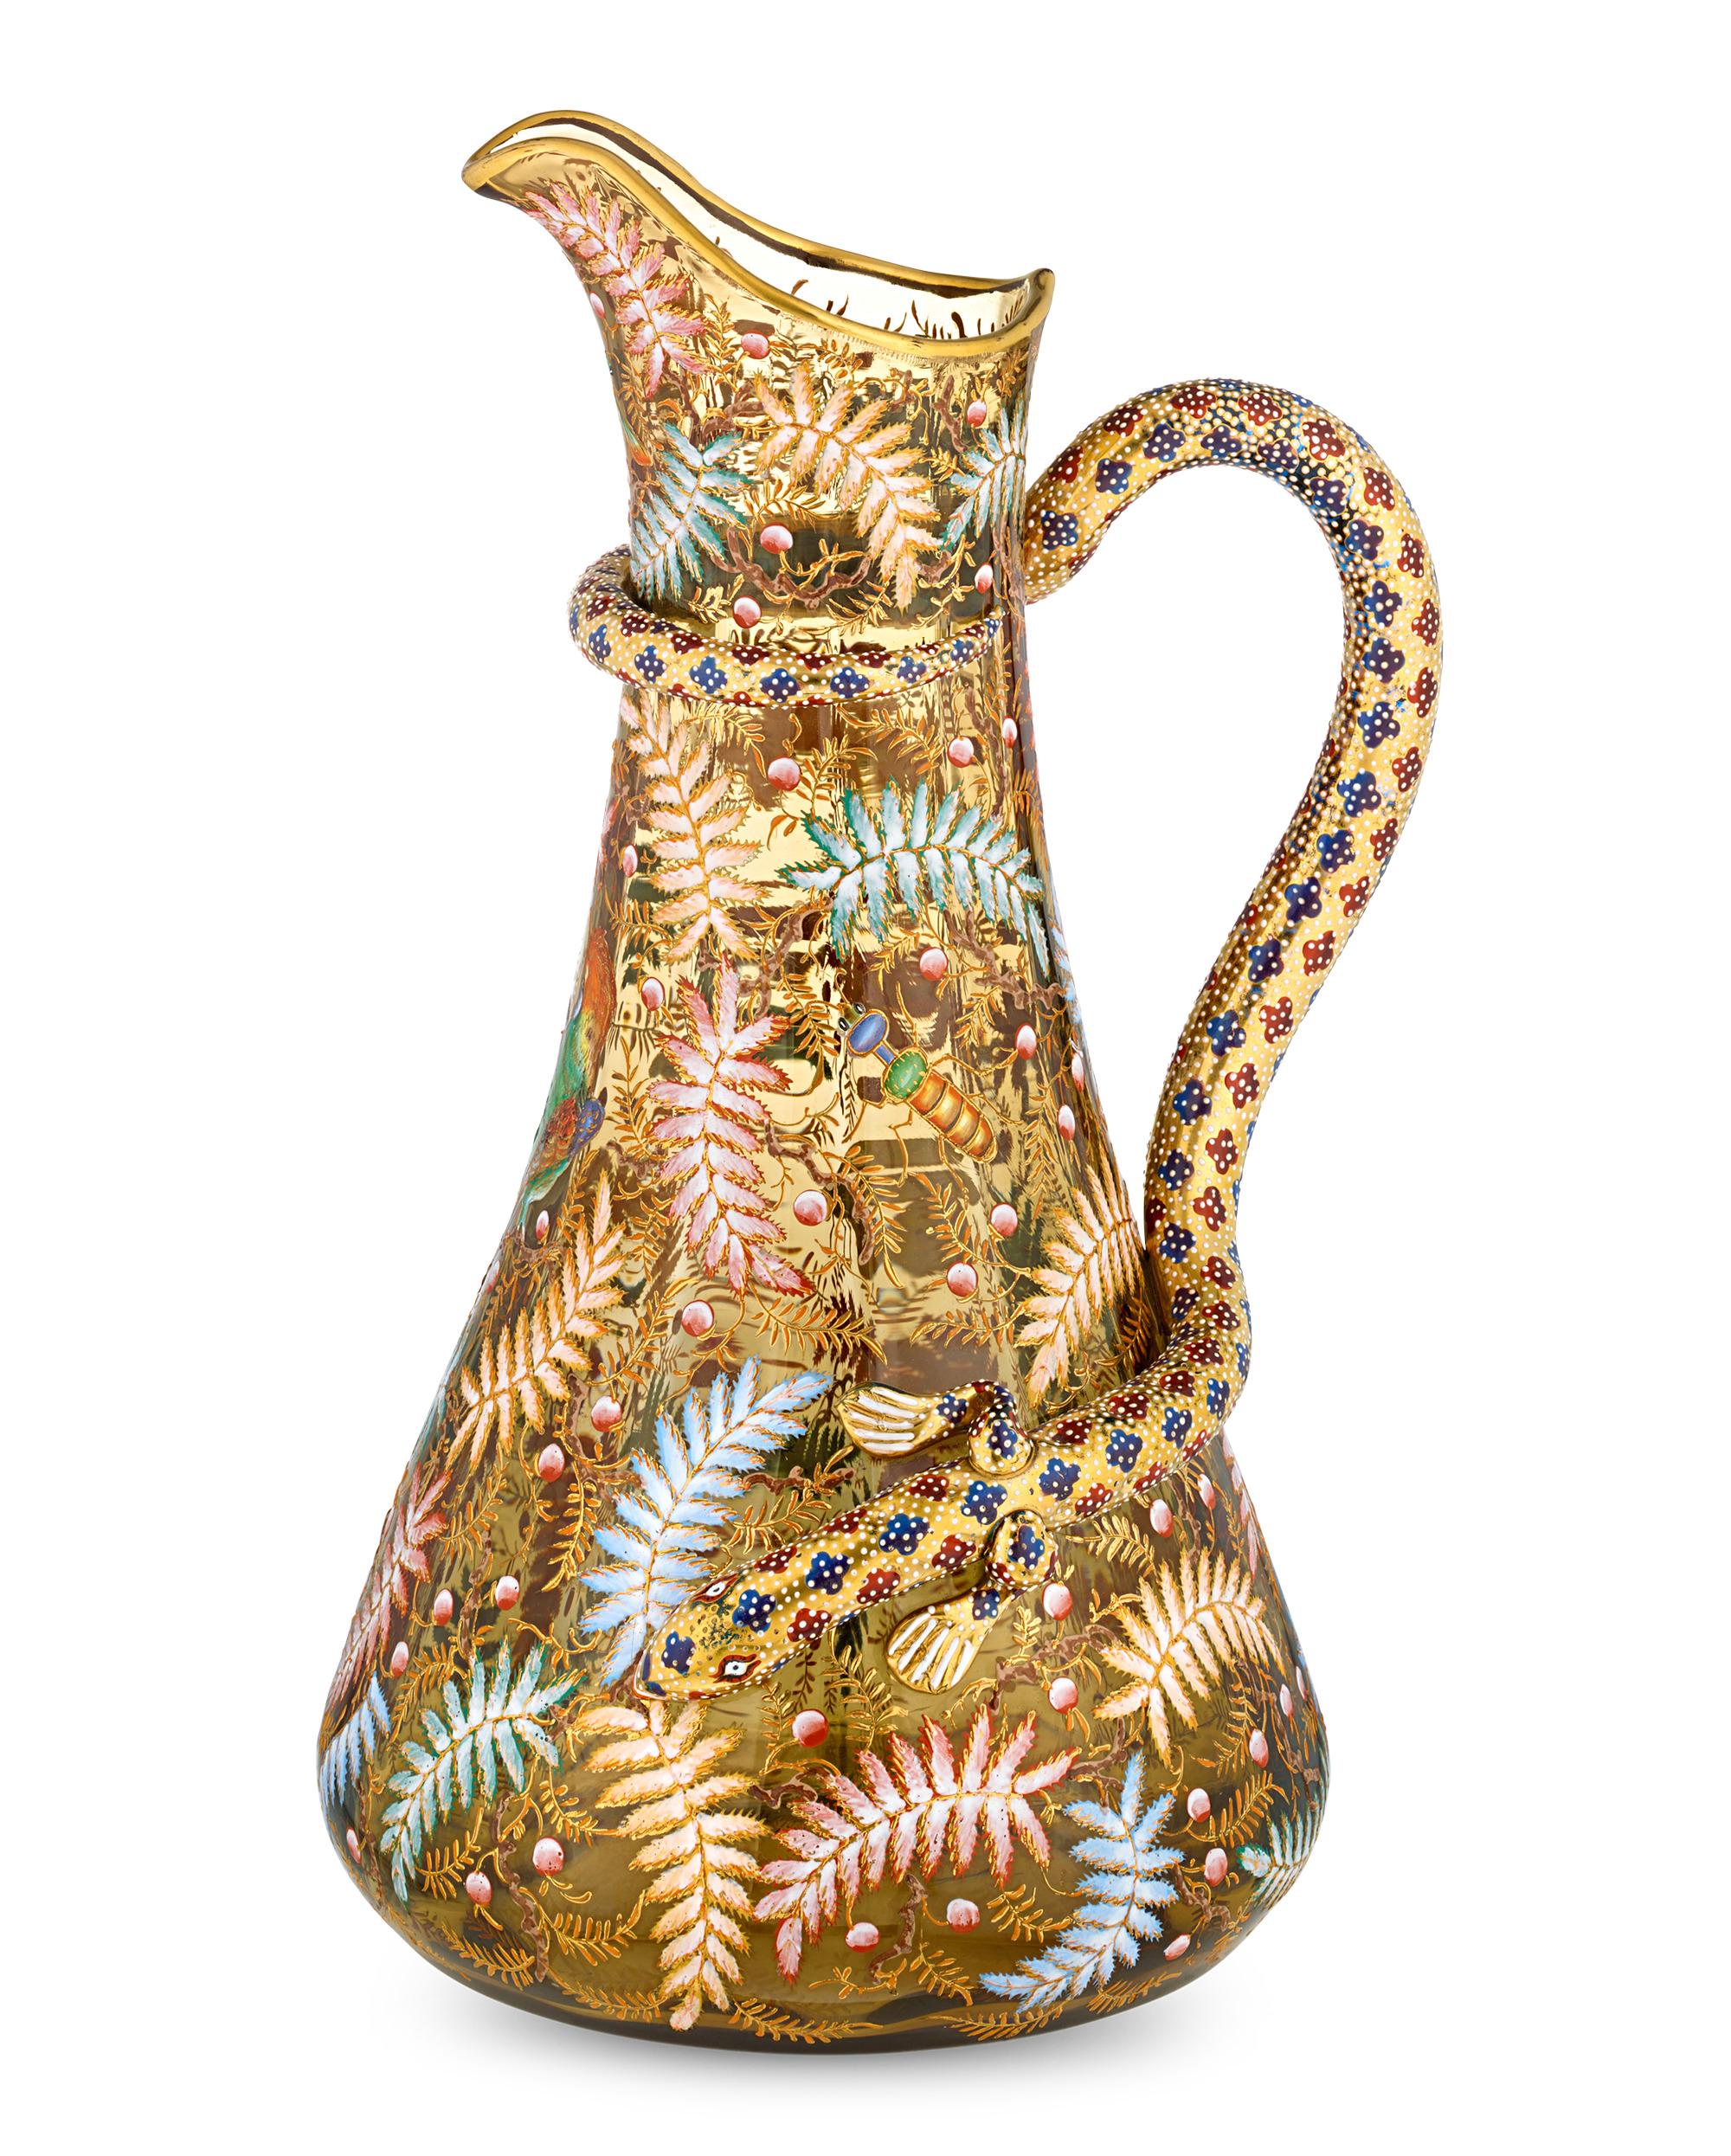 Fantastic wildlife decoration distinguishes this rare Moser glass pitcher. Crafted of luminous amber glass, this pitcher is adorned with the signature Moser gilded fern leaves and berries, including an enameled three-dimensional bee and a colorful